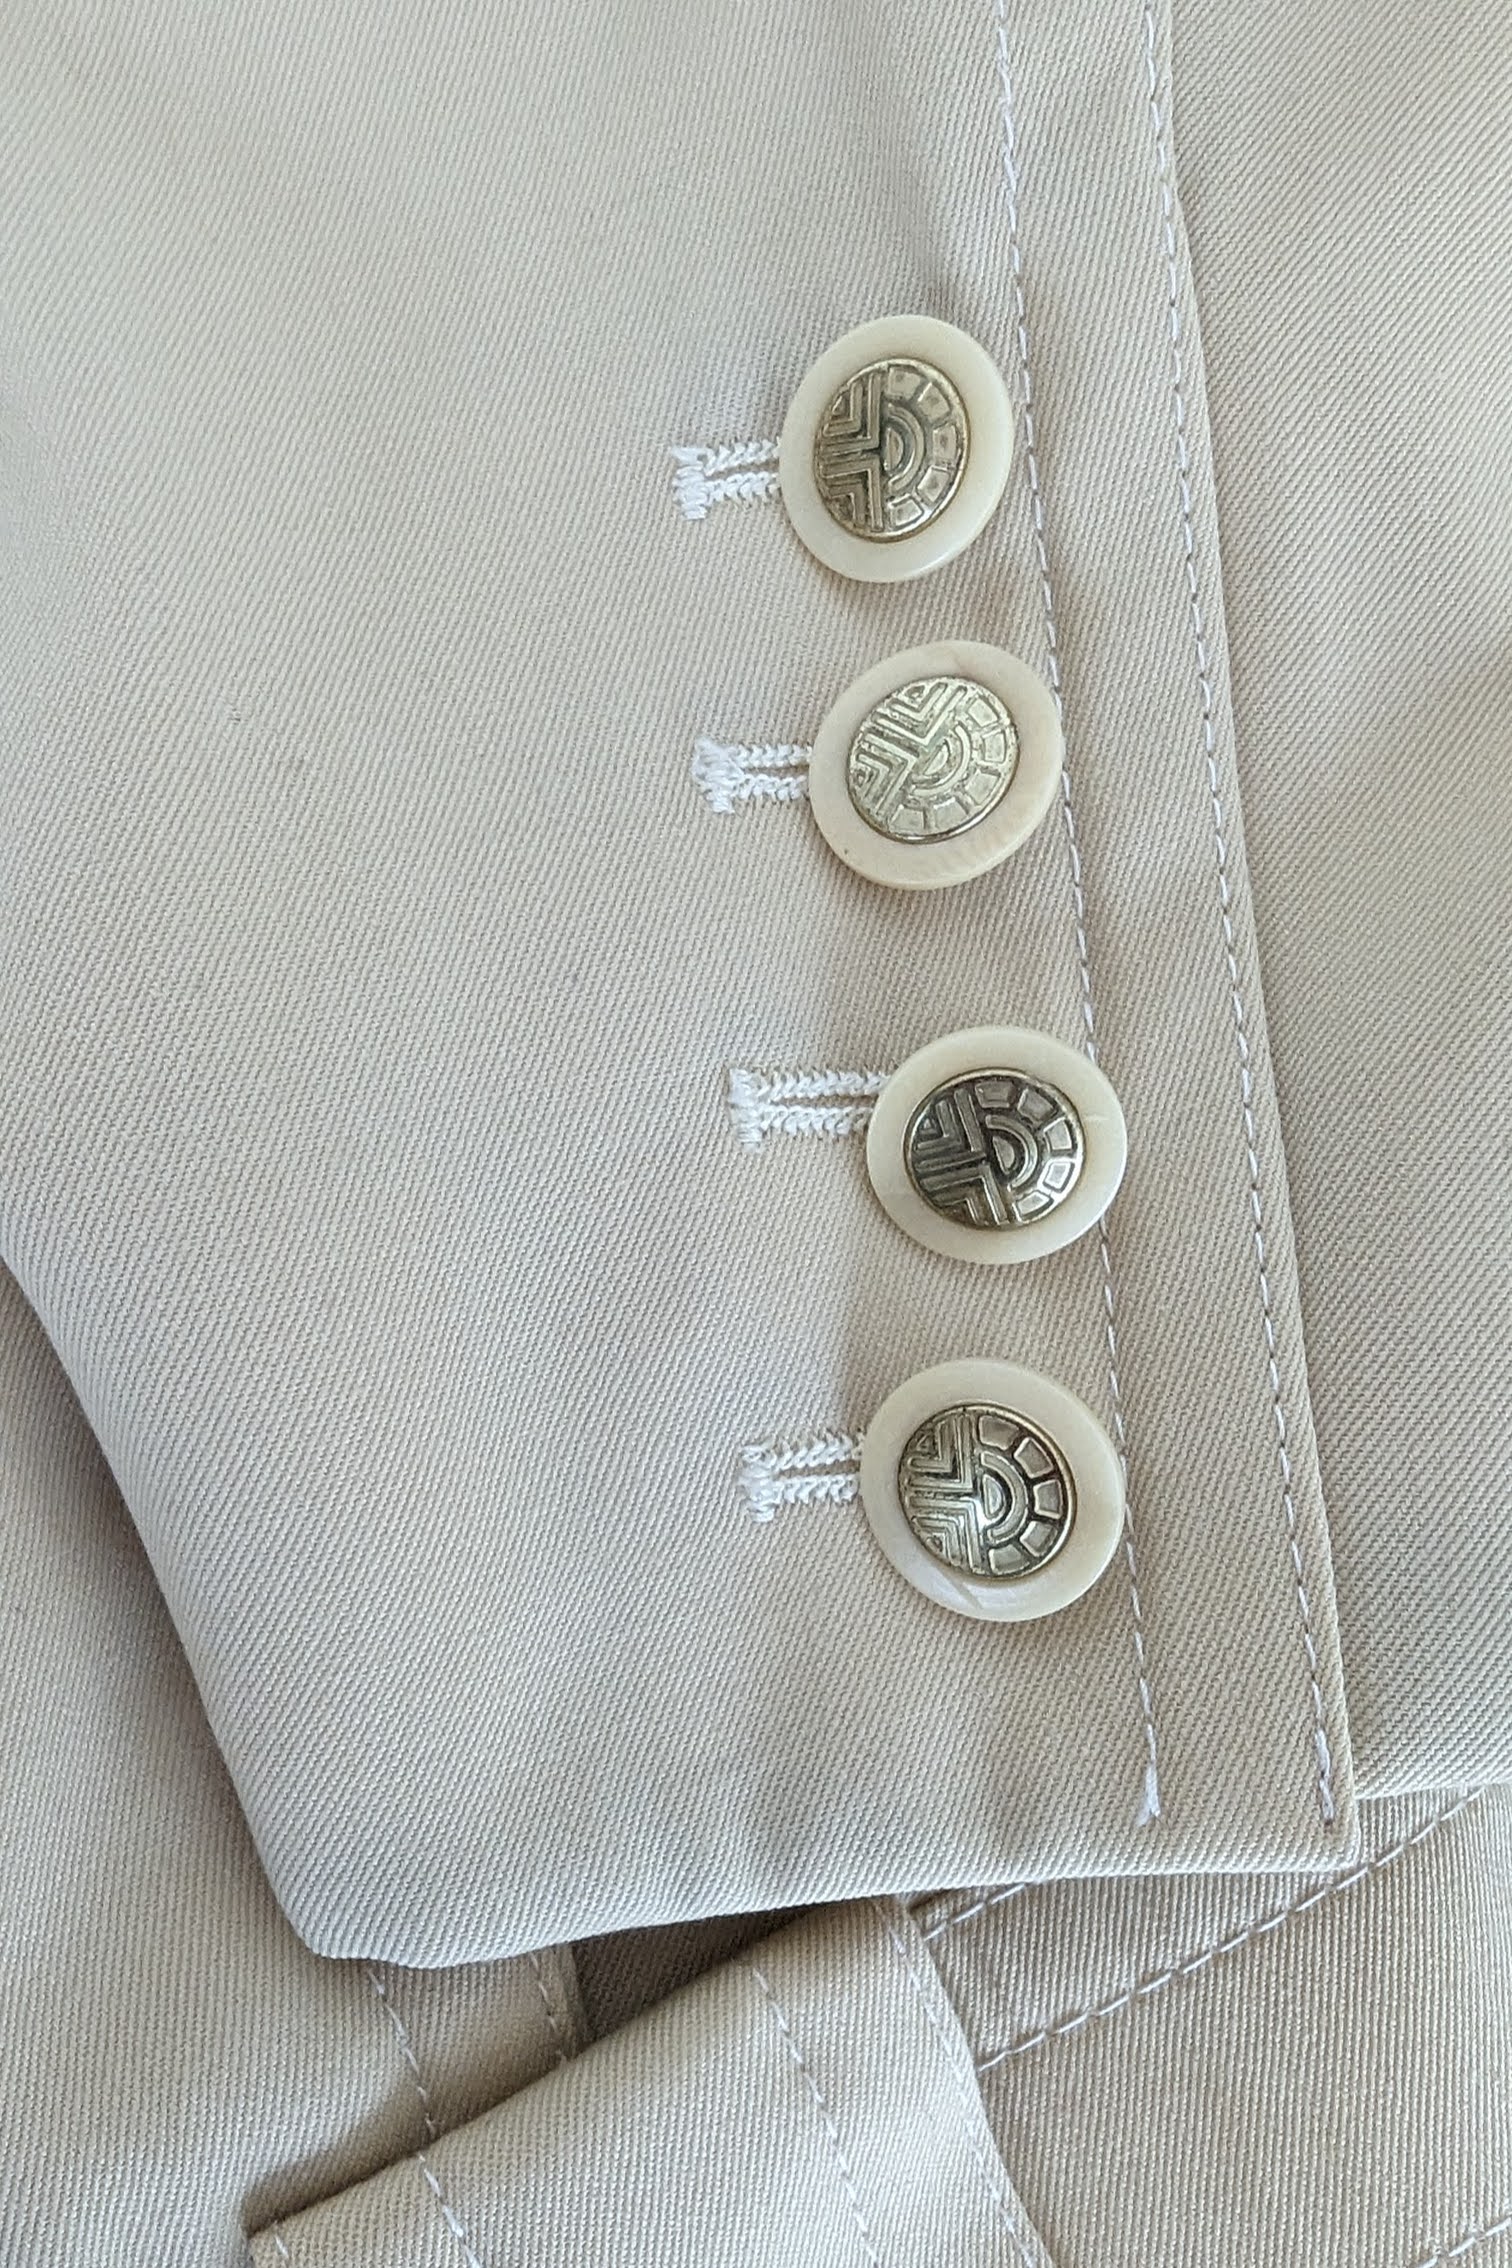 Gold Art Deco Style Buttons